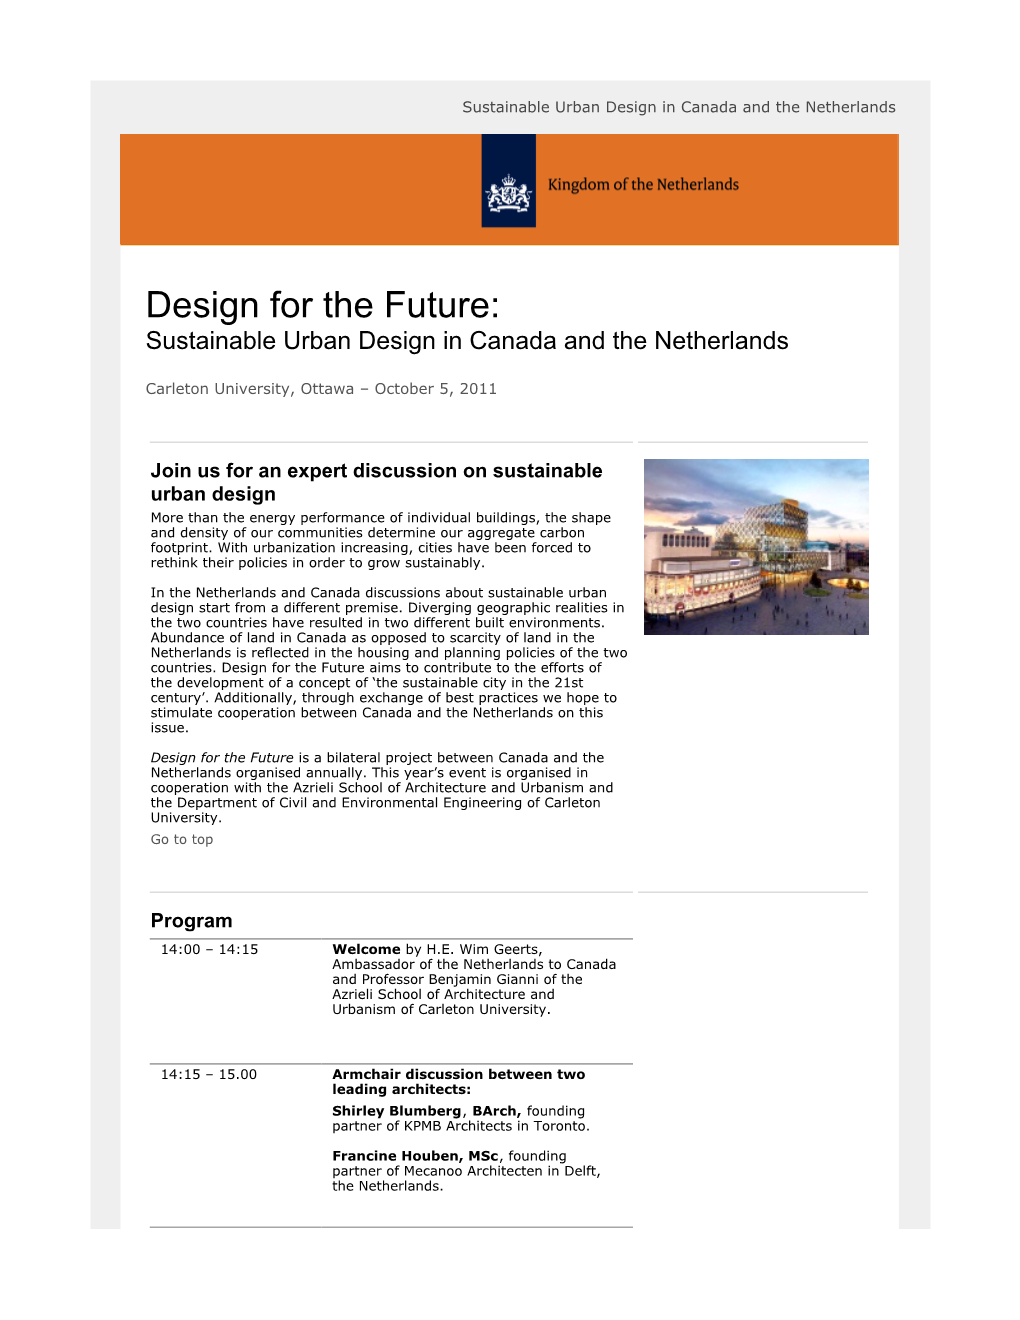 Design for the Future: Sustainable Urban Design in Canada and the Netherlands